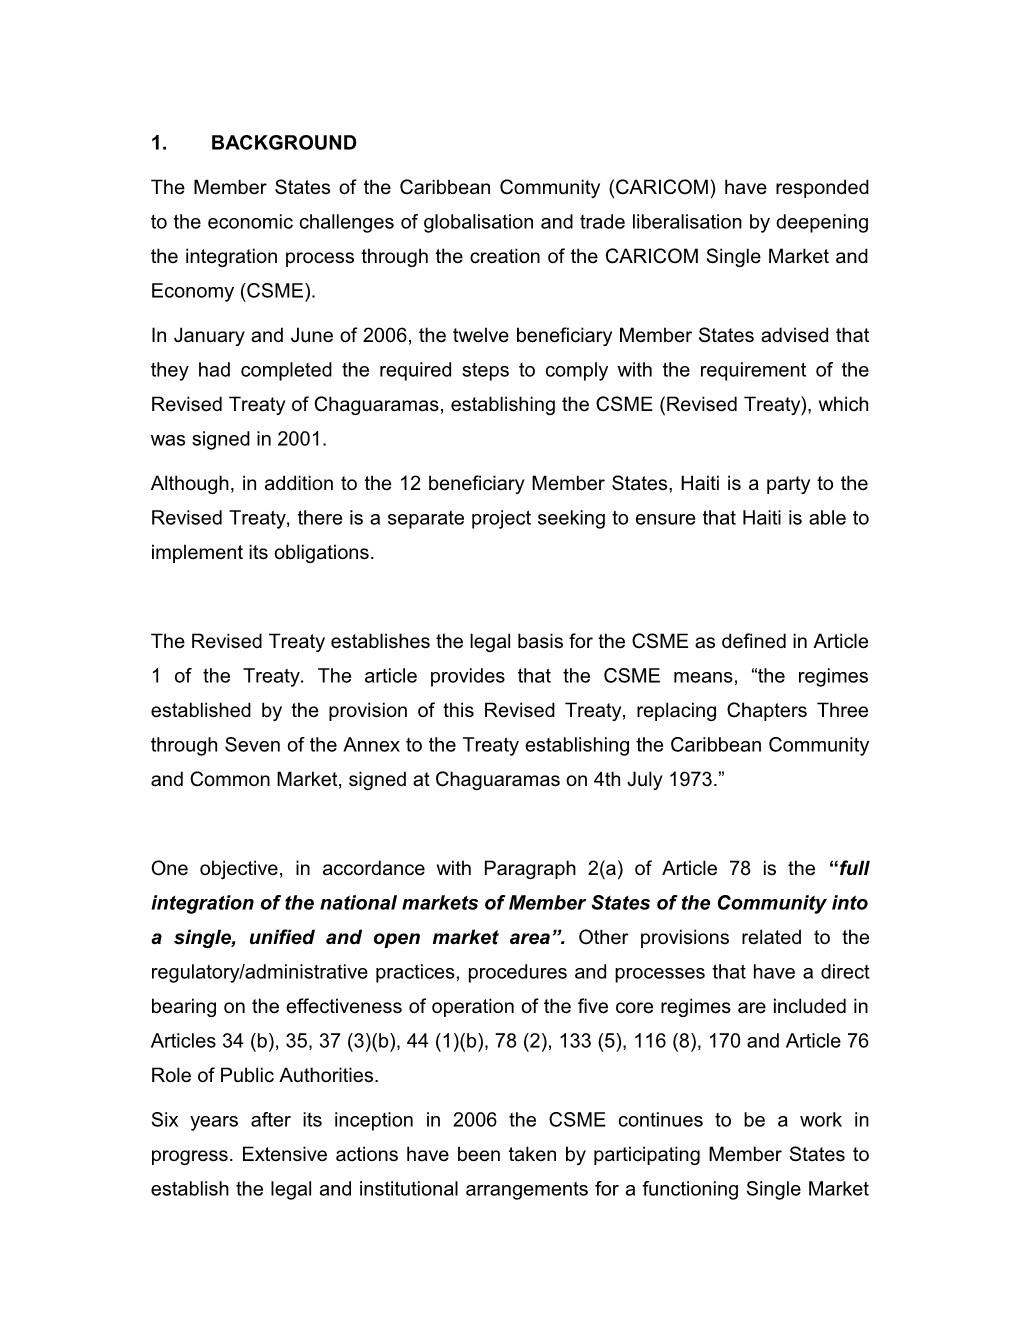 The Member States of the Caribbean Community (CARICOM) Have Responded to the Economic Challenges